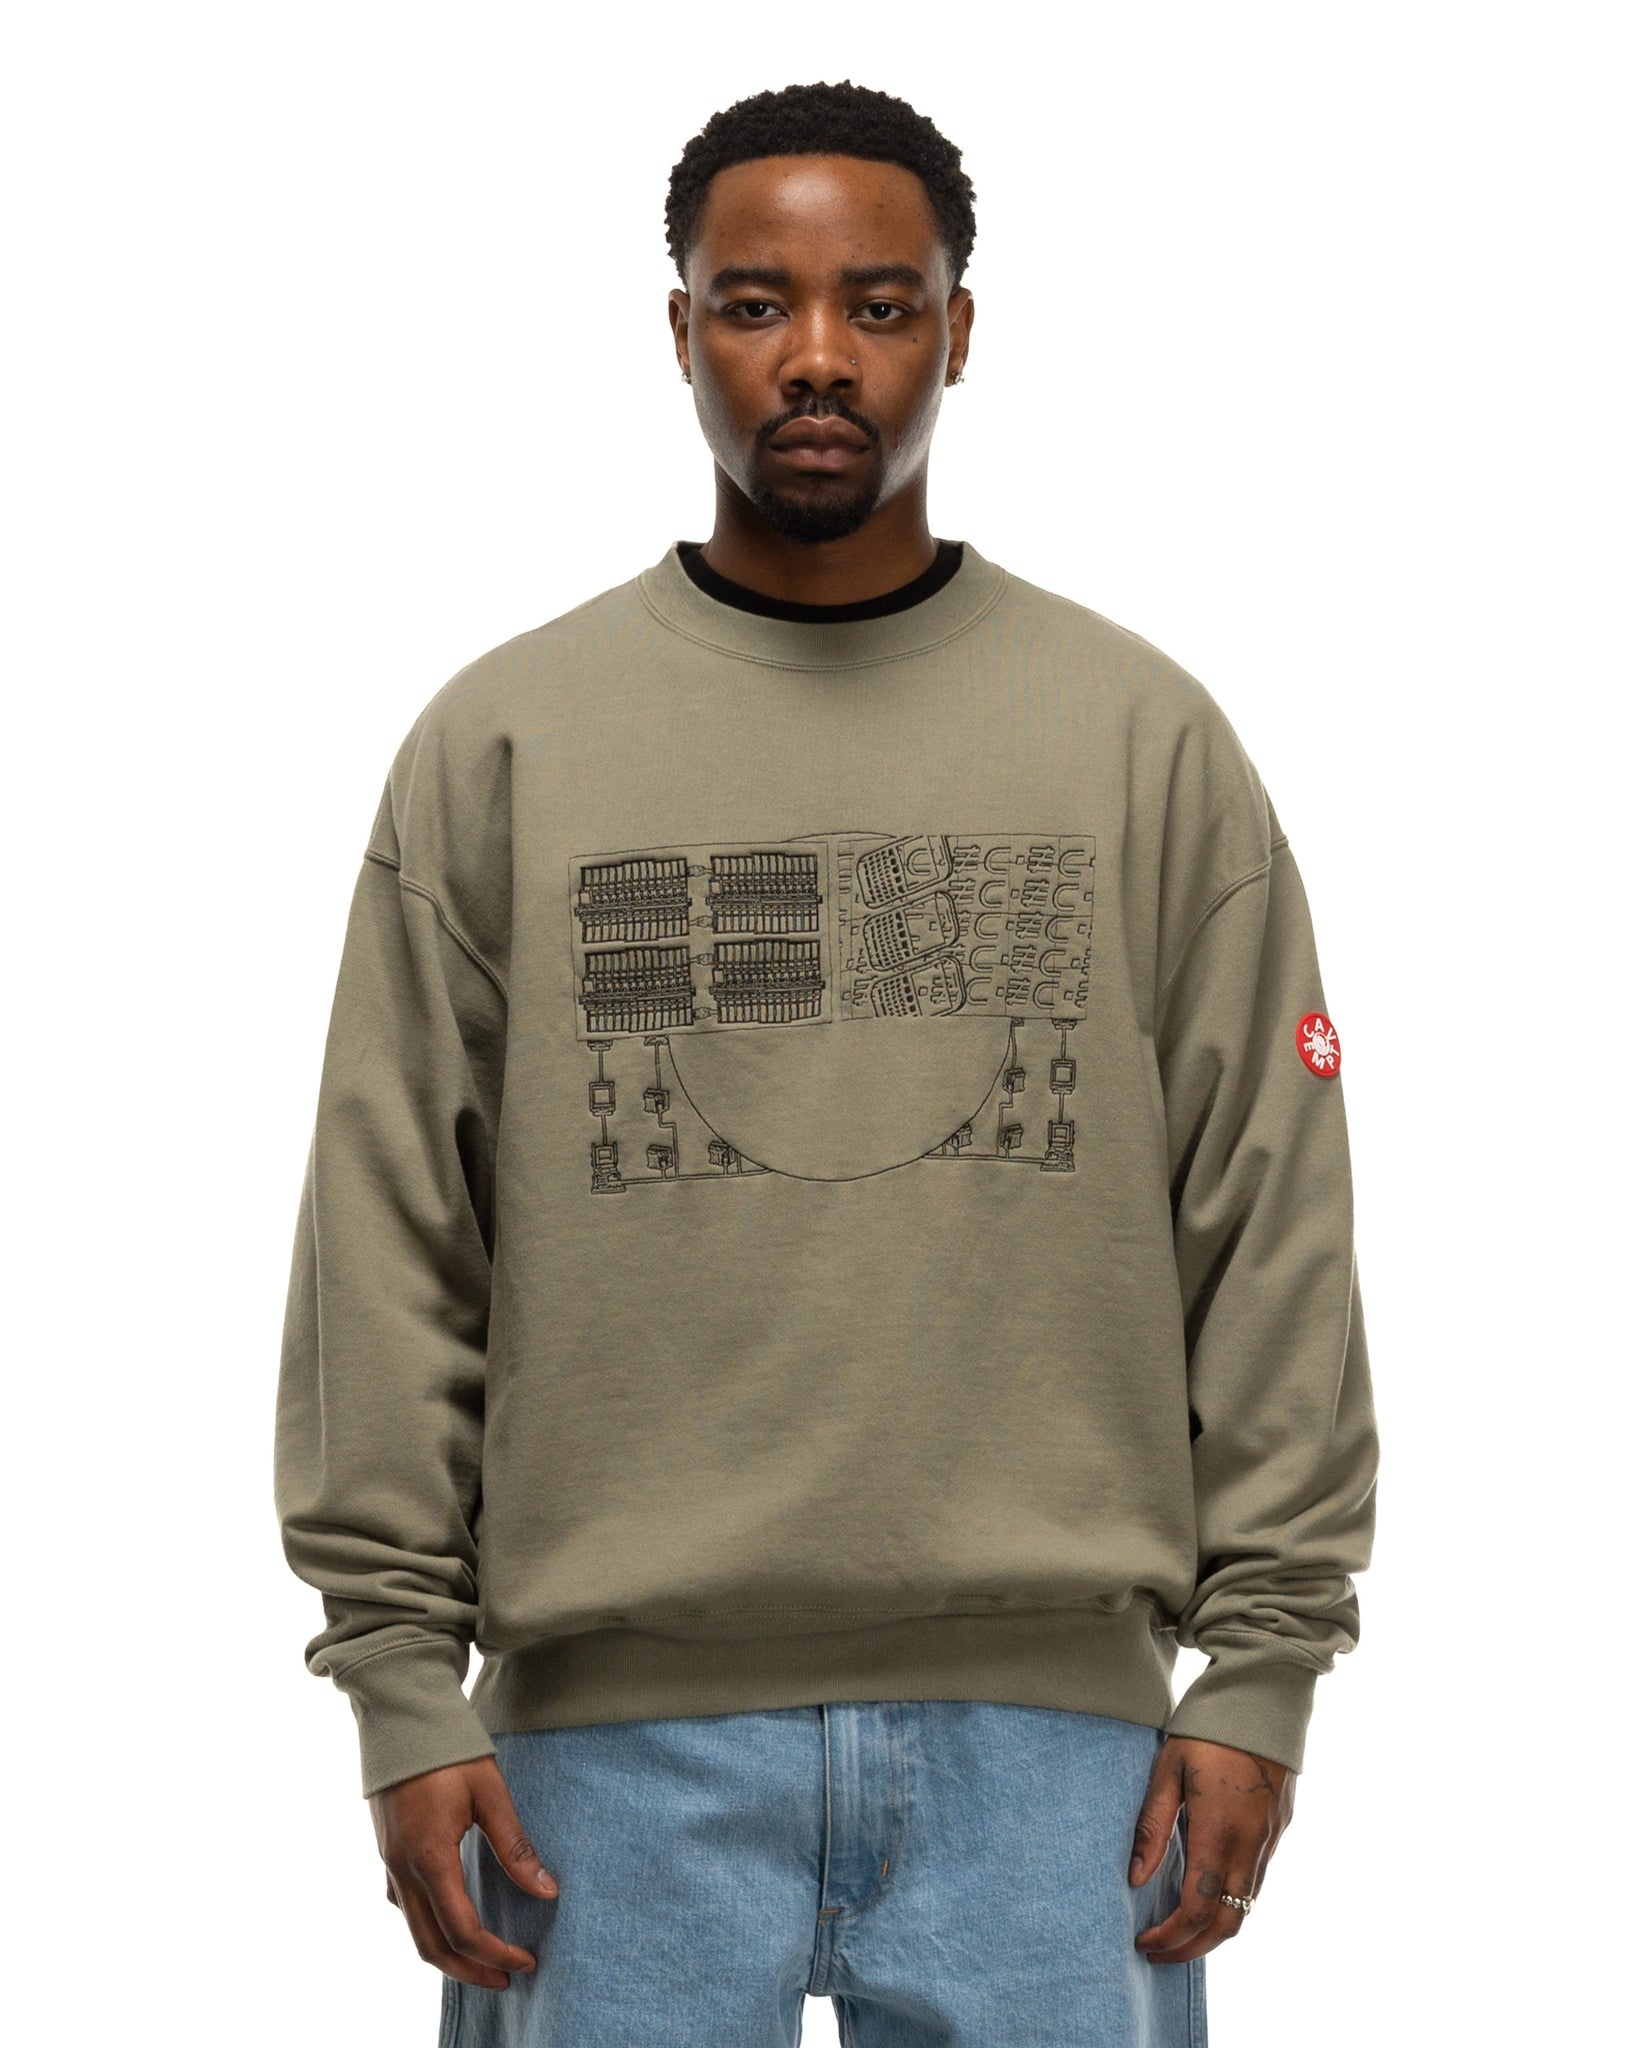 NOT IDENTICAL TO CREWNECK OLIVE - 4